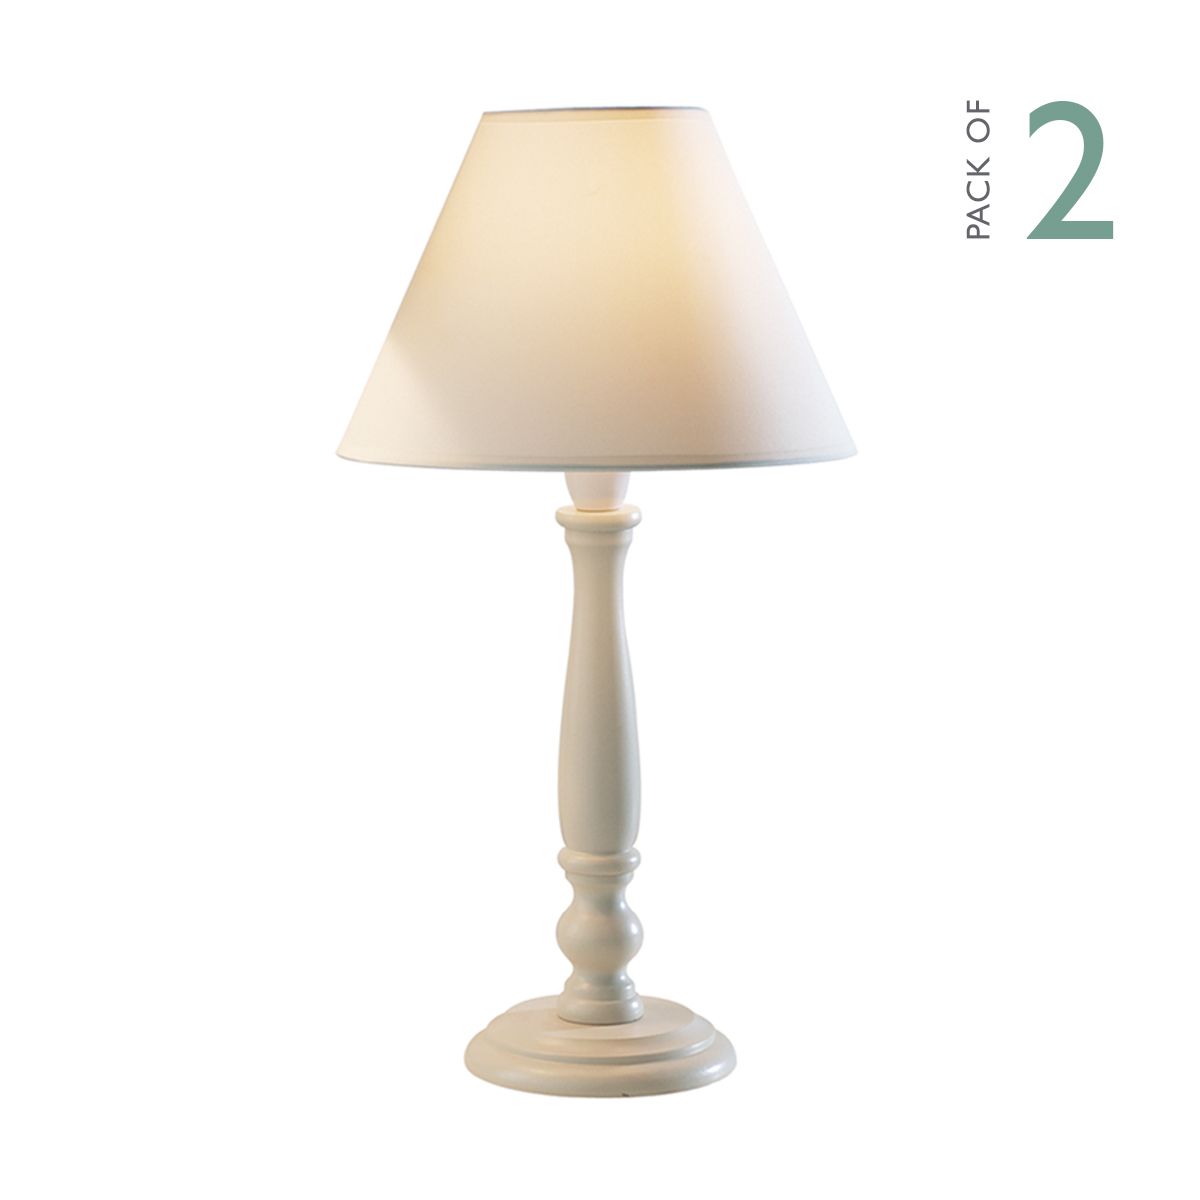 Regal Table Lamp 10 Inch Cream Complete, Best Shade For Candlestick Lamp